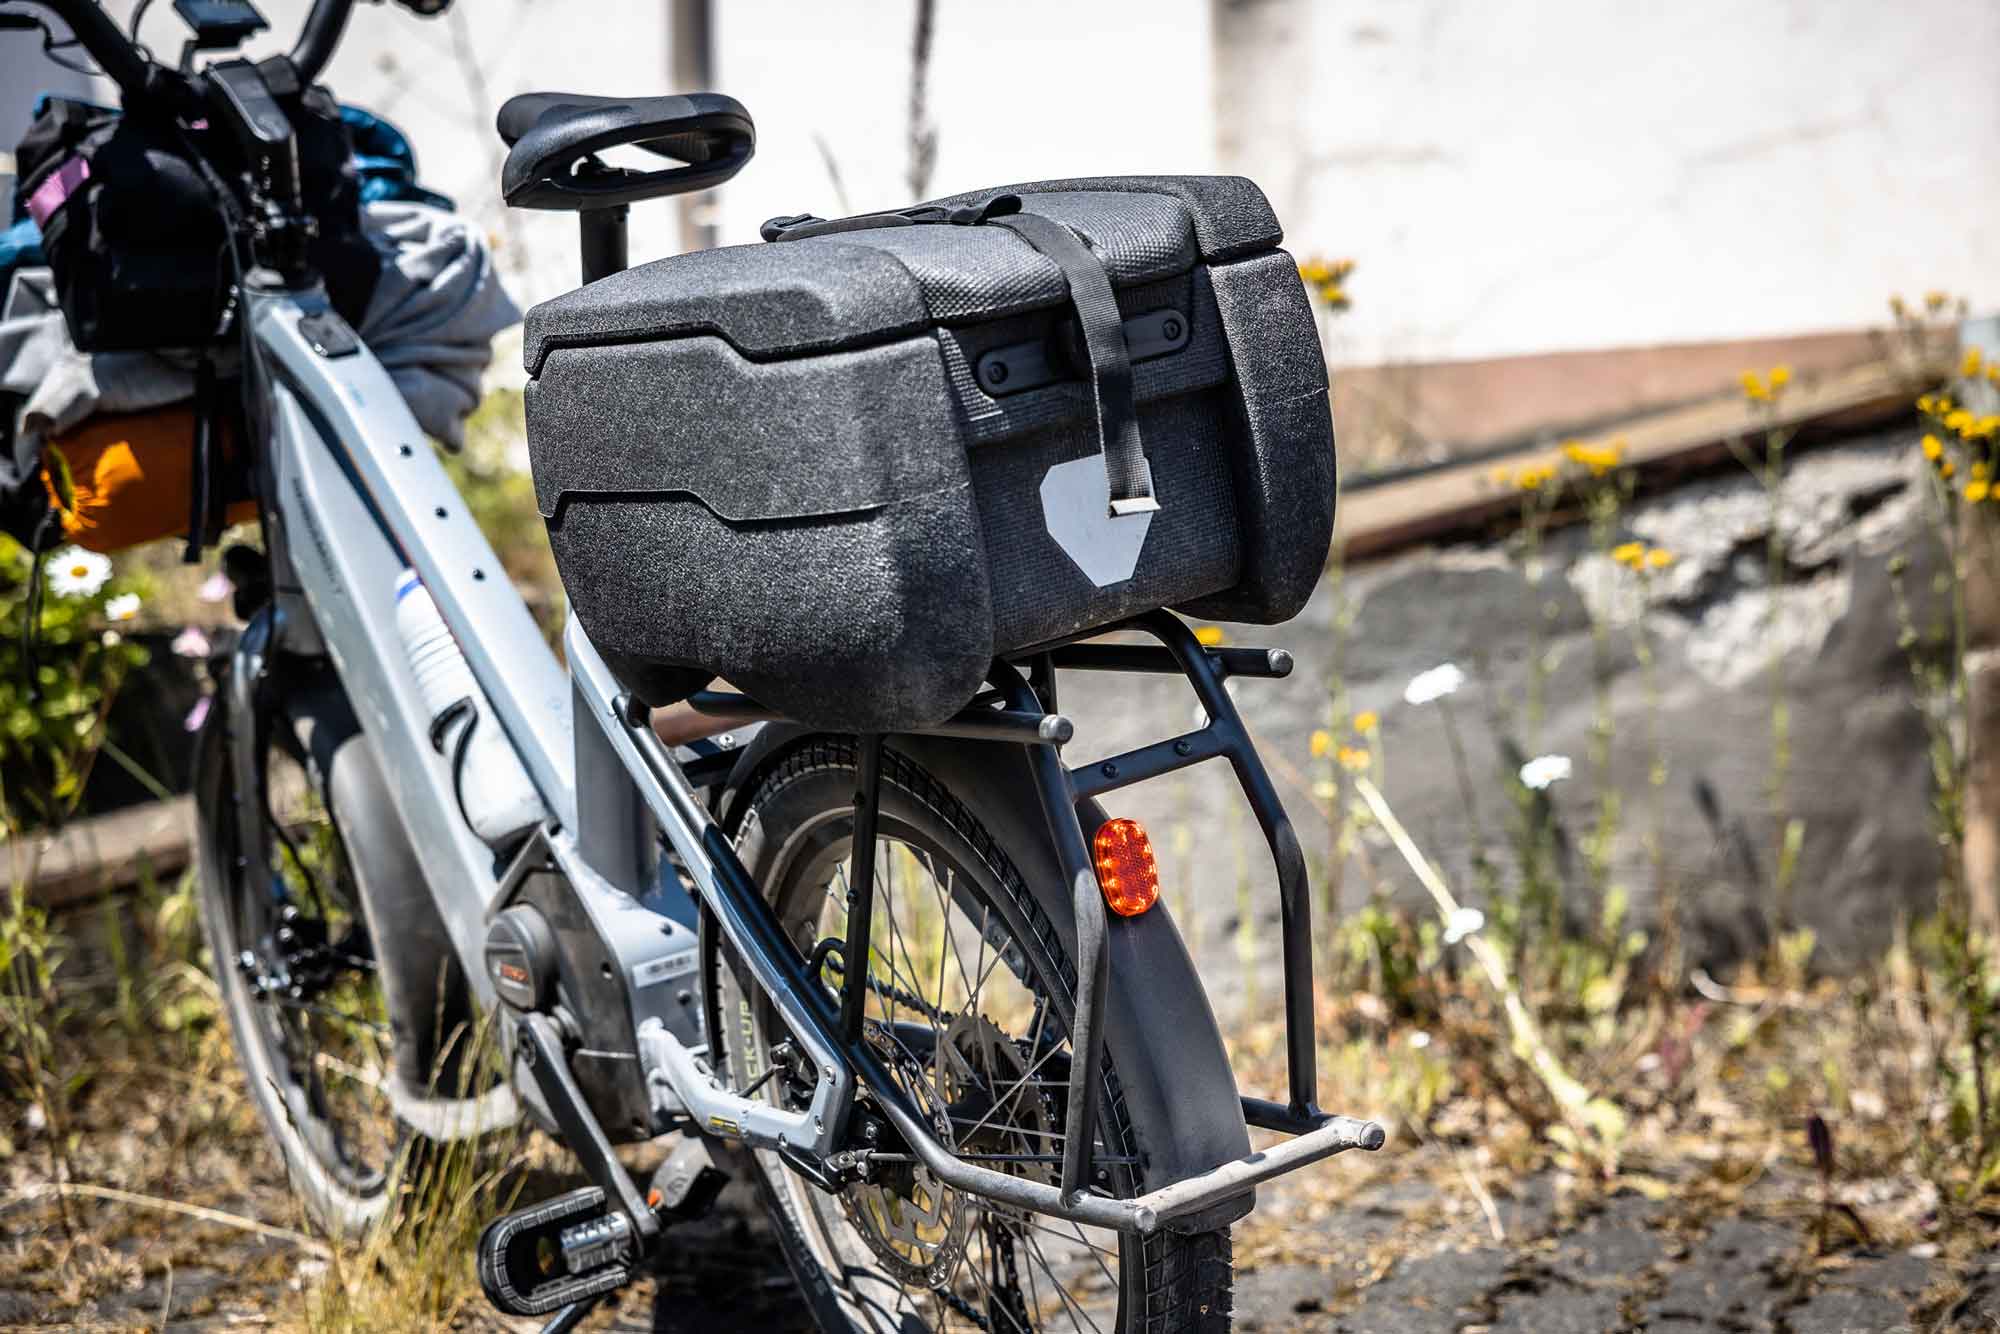 The robust luggage rack at the rear of the bergamont hans-e takes all kinds of accessories. Instead of bags, martin has mounted this iso-box from ortlieb. In it, purchases are perfectly protected and well tempered.